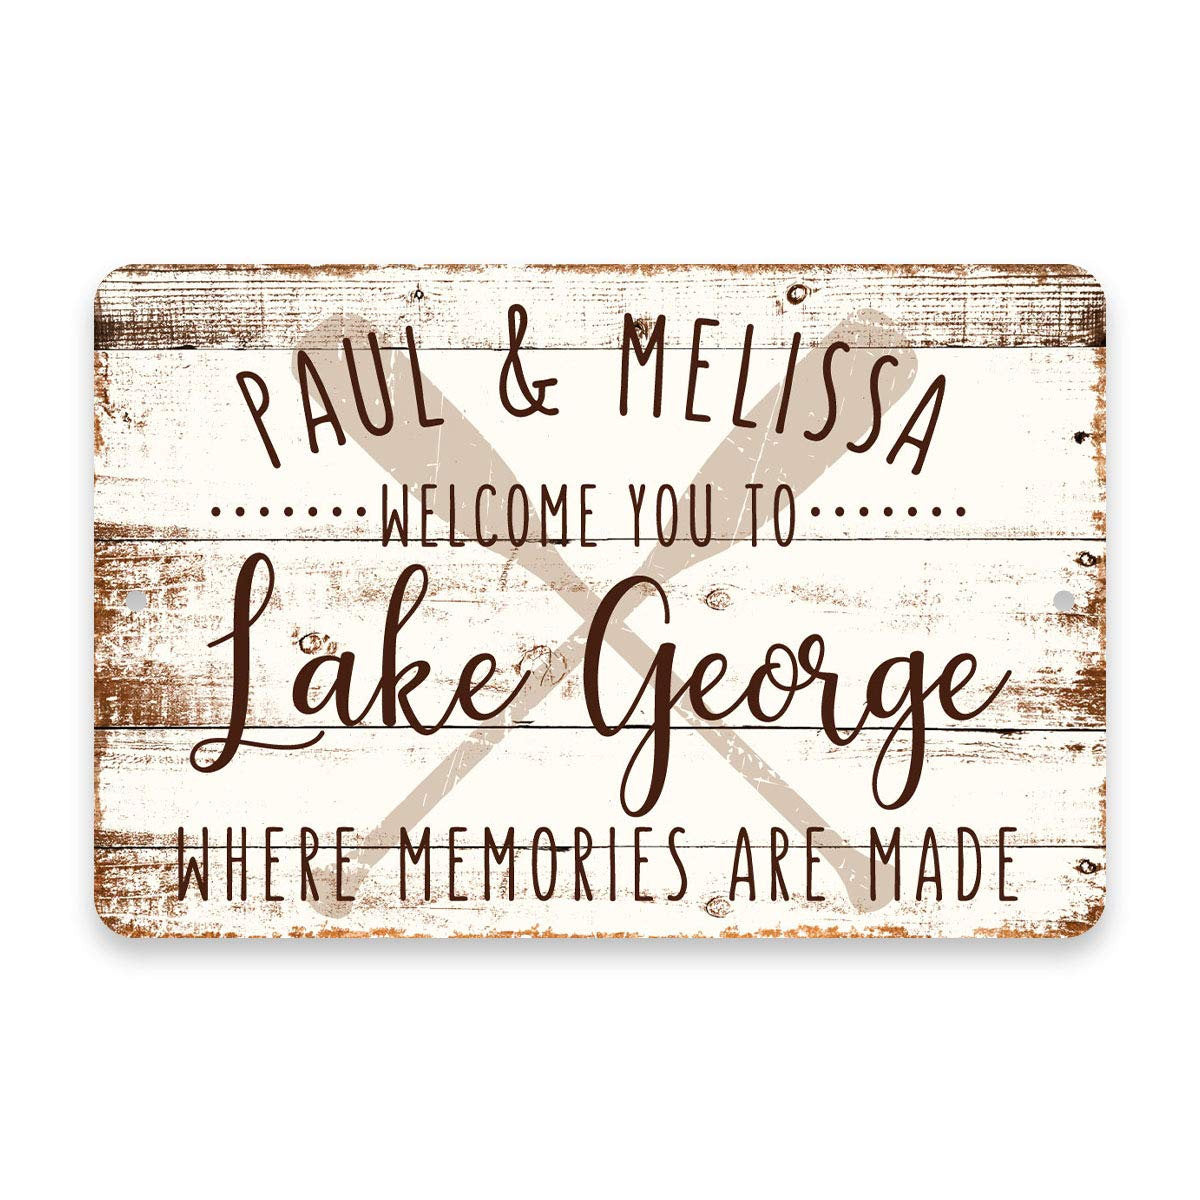 Personalized Welcome to Lake George Where Memories are Made Sign - 8 X 12 Metal Sign with Wood Look